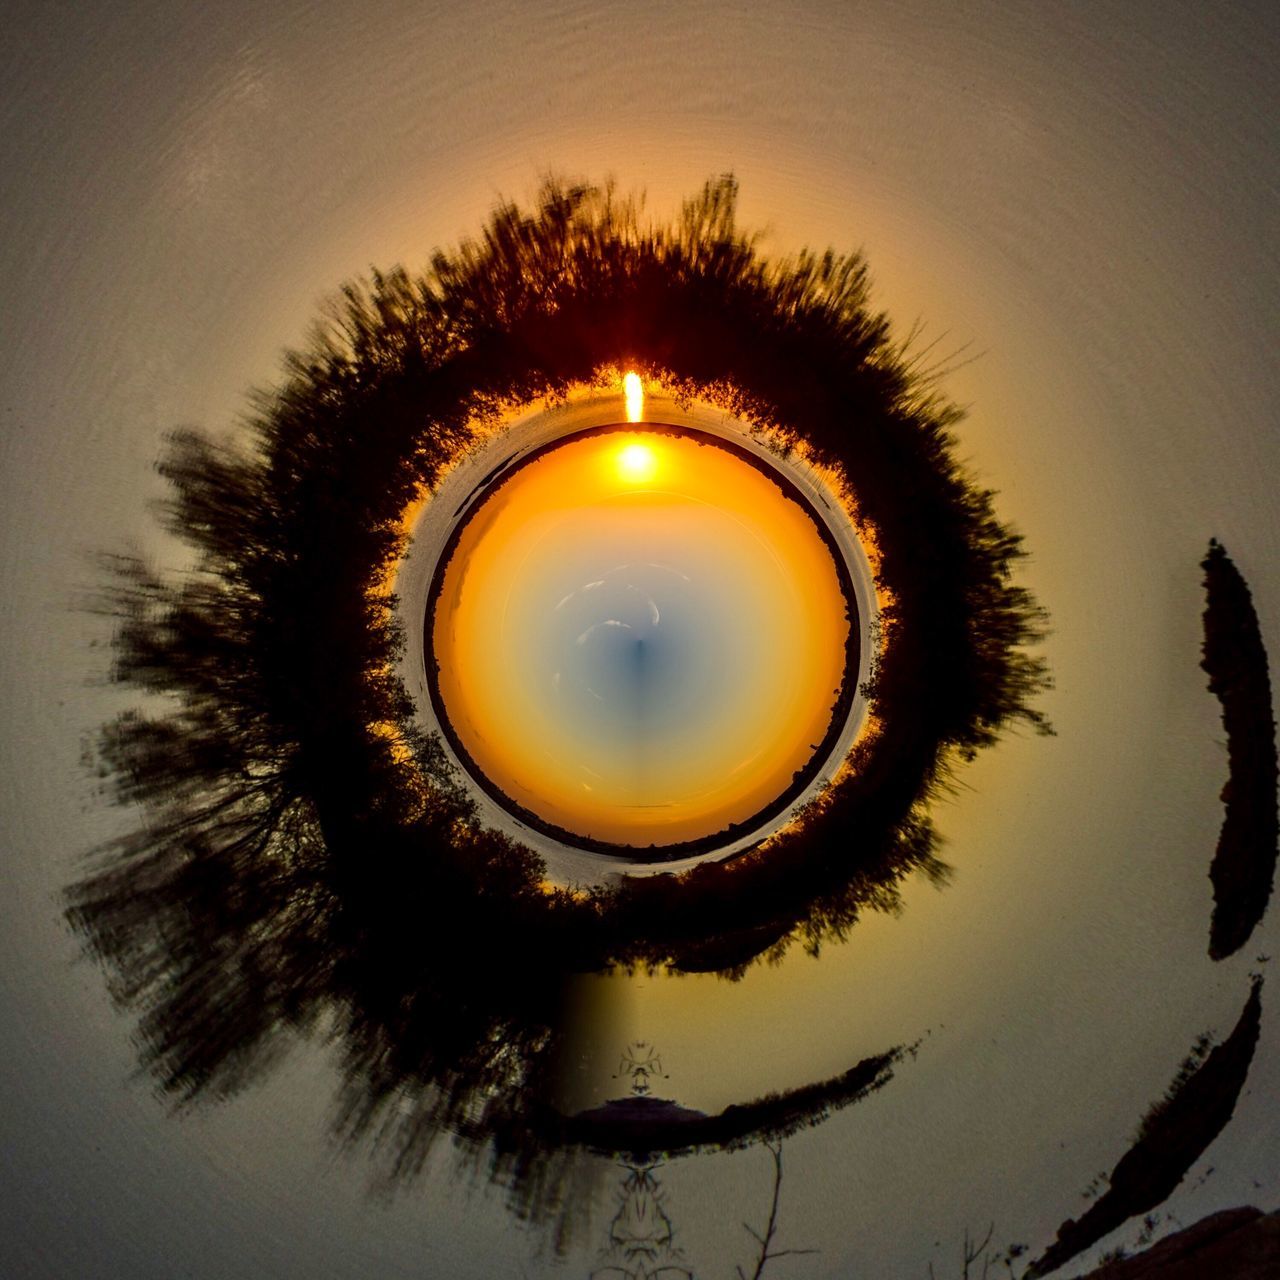 circle, geometric shape, tree, sunset, sky, reflection, nature, plant, shape, no people, silhouette, digital composite, beauty in nature, water, close-up, tranquility, outdoors, growth, design